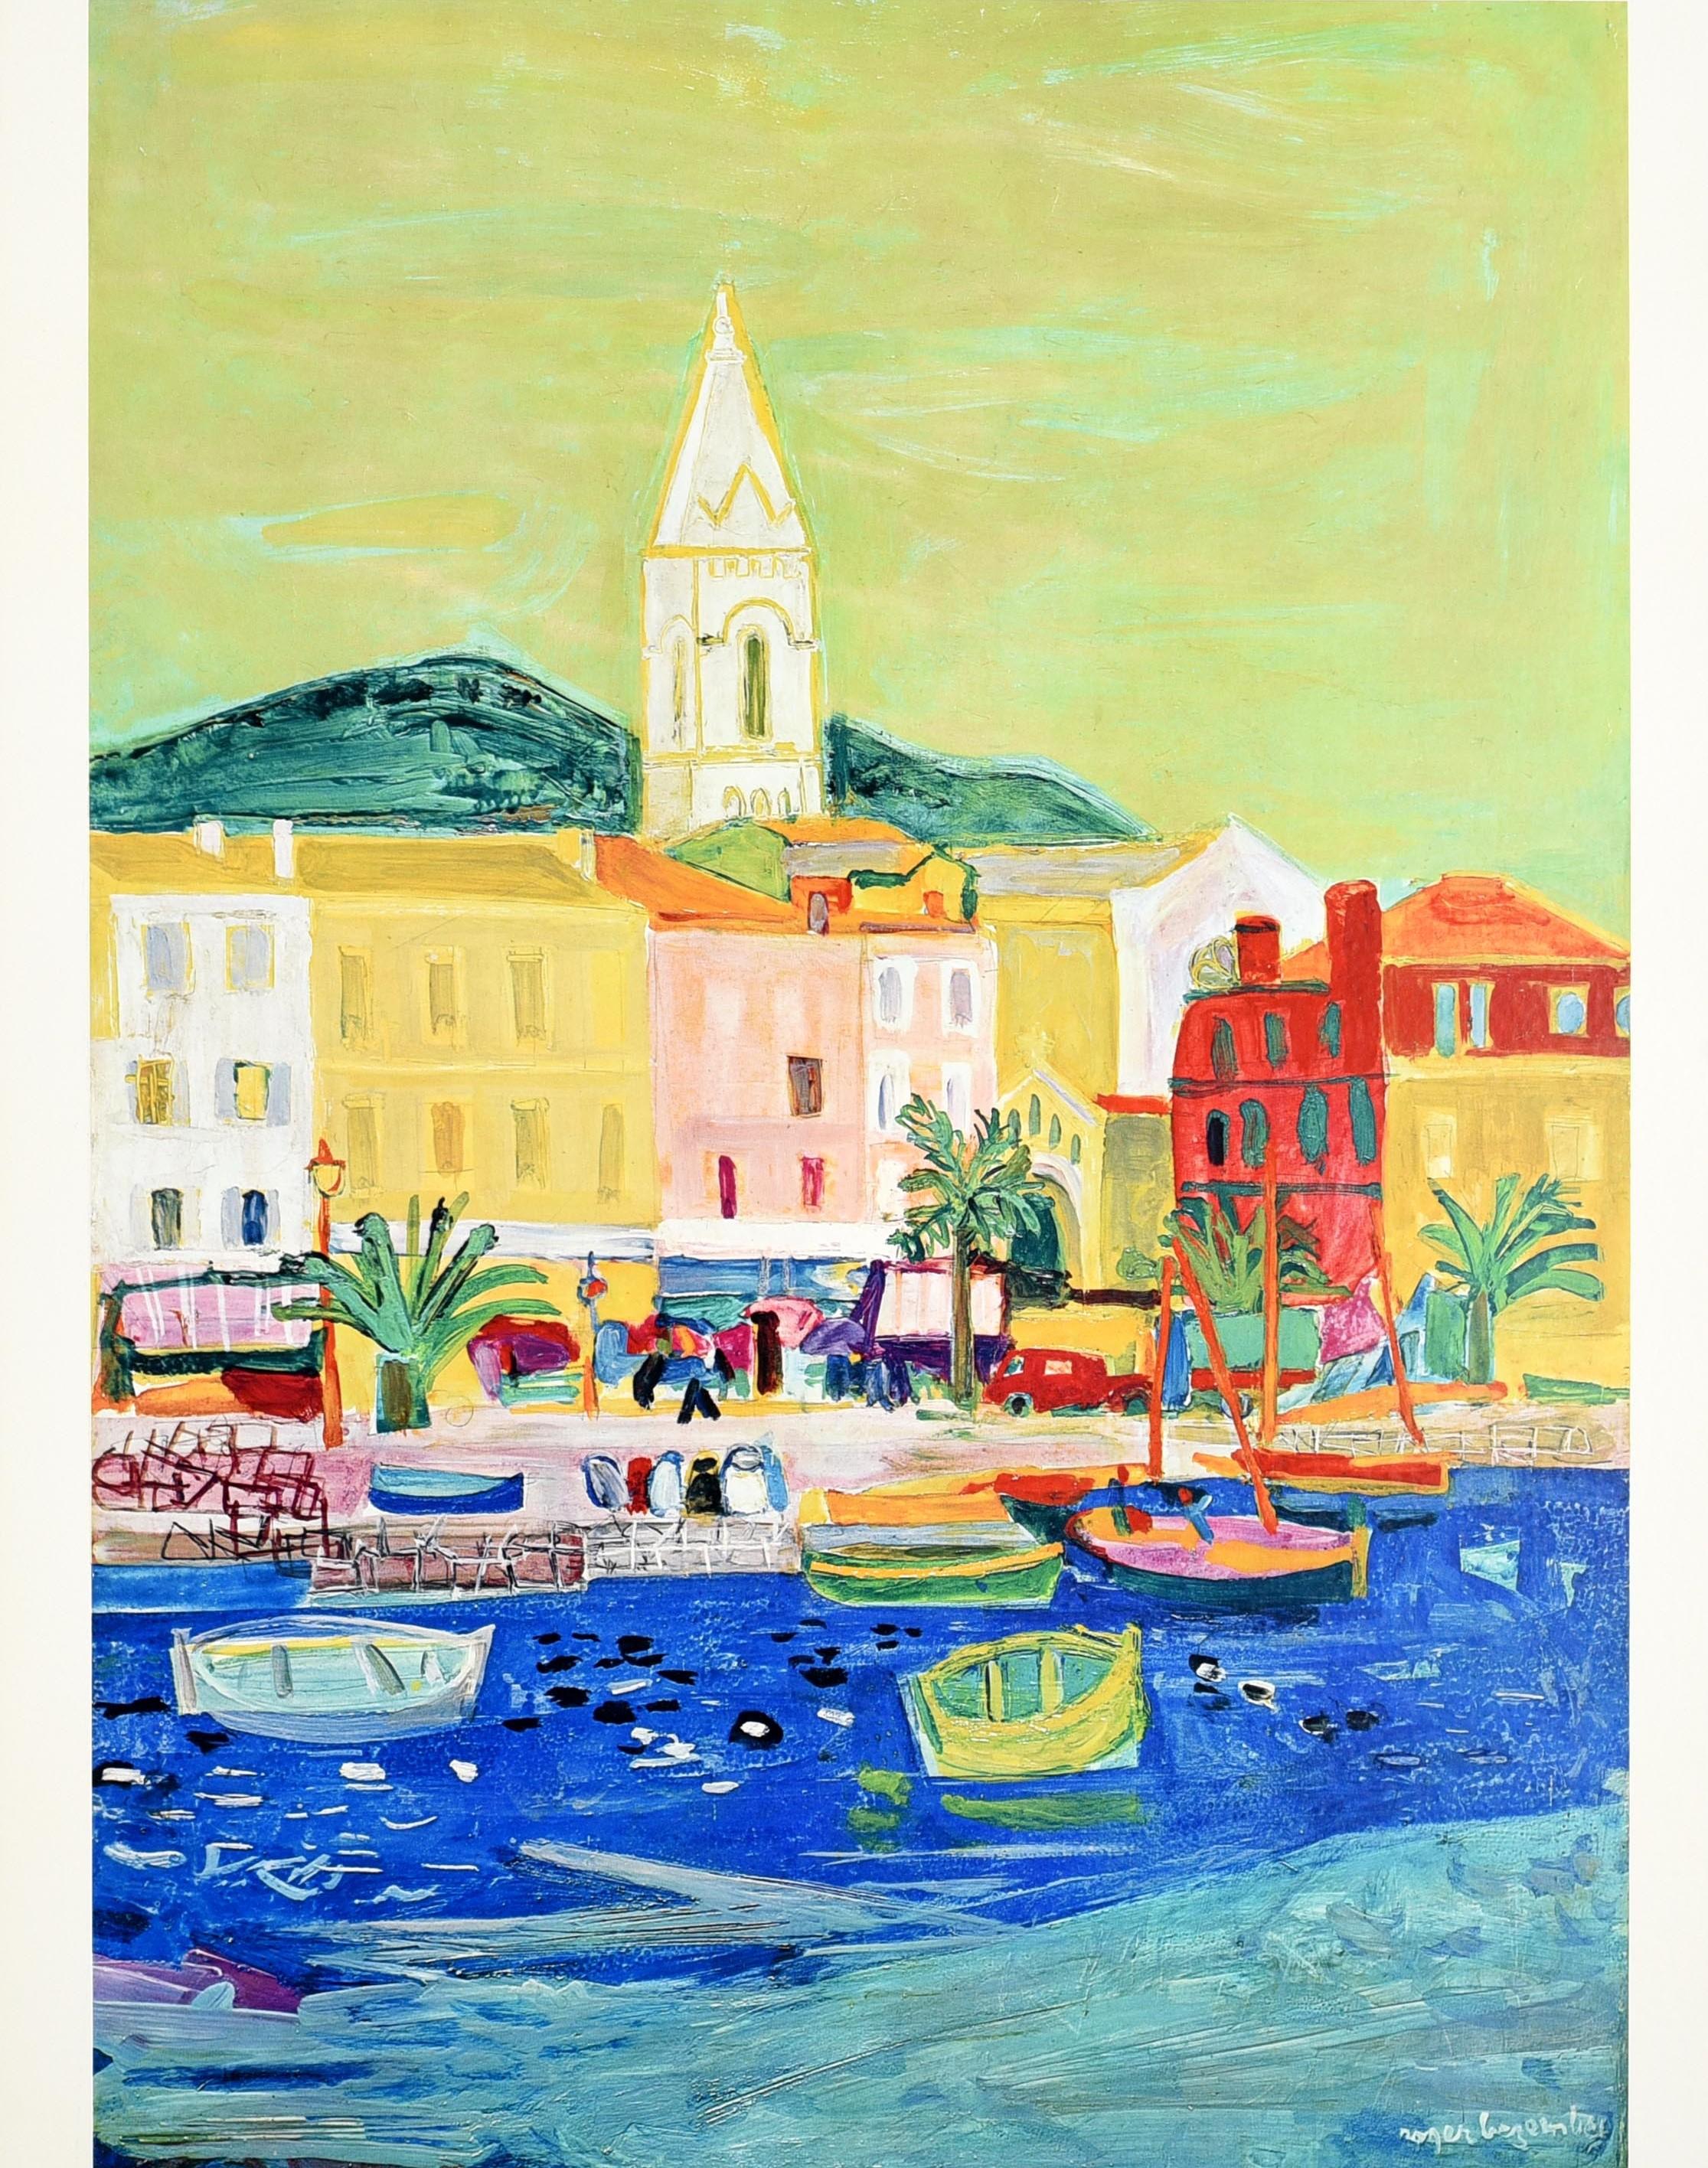 Mid-20th Century Original Vintage Poster Discover France By Train Cote D'Azur French Riviera Art